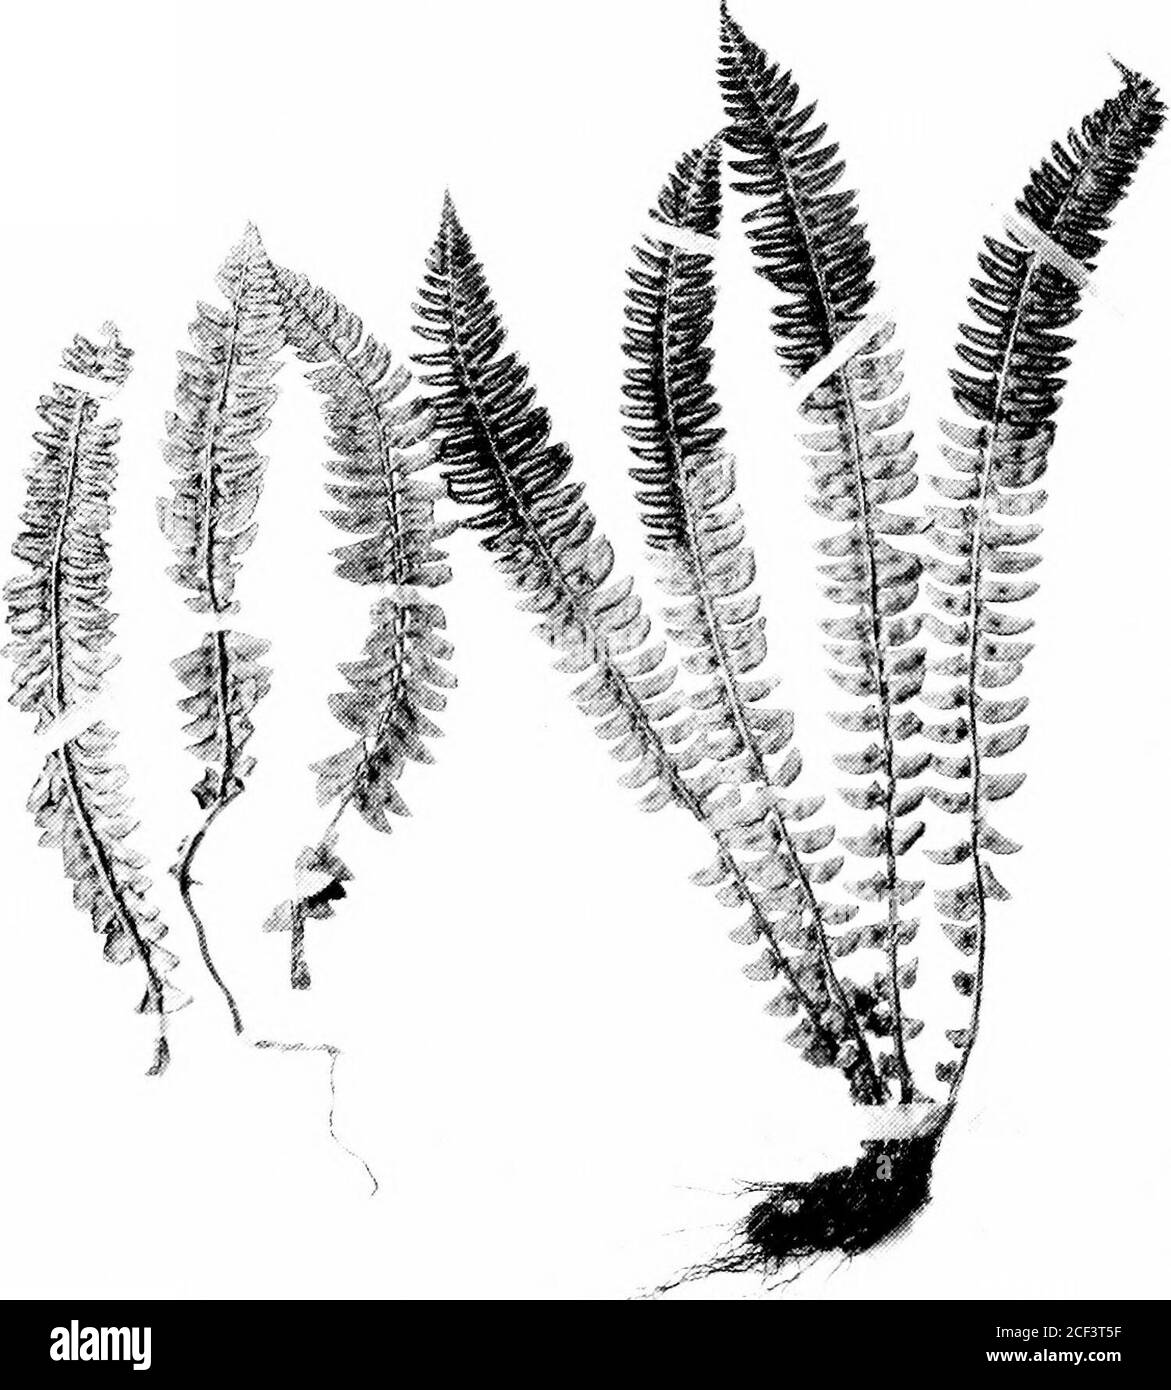 . The fern lover's companion; a guide for the Northeastern States and Canada. Brauns Holly Fern.(Willoughhy Mountain,  t.) Polystichum Braunn (Herbarium of G. H. 1.) The Fern Lovers Companion 113. Holly Fern. Poli/stichum Lonchiti.i (Nottawasaga, Canada. West. Right, Alaska, Loft)(Herbarium of G. E. Davenport) 114 The Febn Lovers Companion and south to Niagara Falls, I^ake Superior and westward.Its southern limits nearly coincide with the northern limitsof the Christmas fern. THE .MARSH FERN TRIBE Under this designation Clute has grouped three of theshield ferns, which ha^•e a close family re Stock Photo